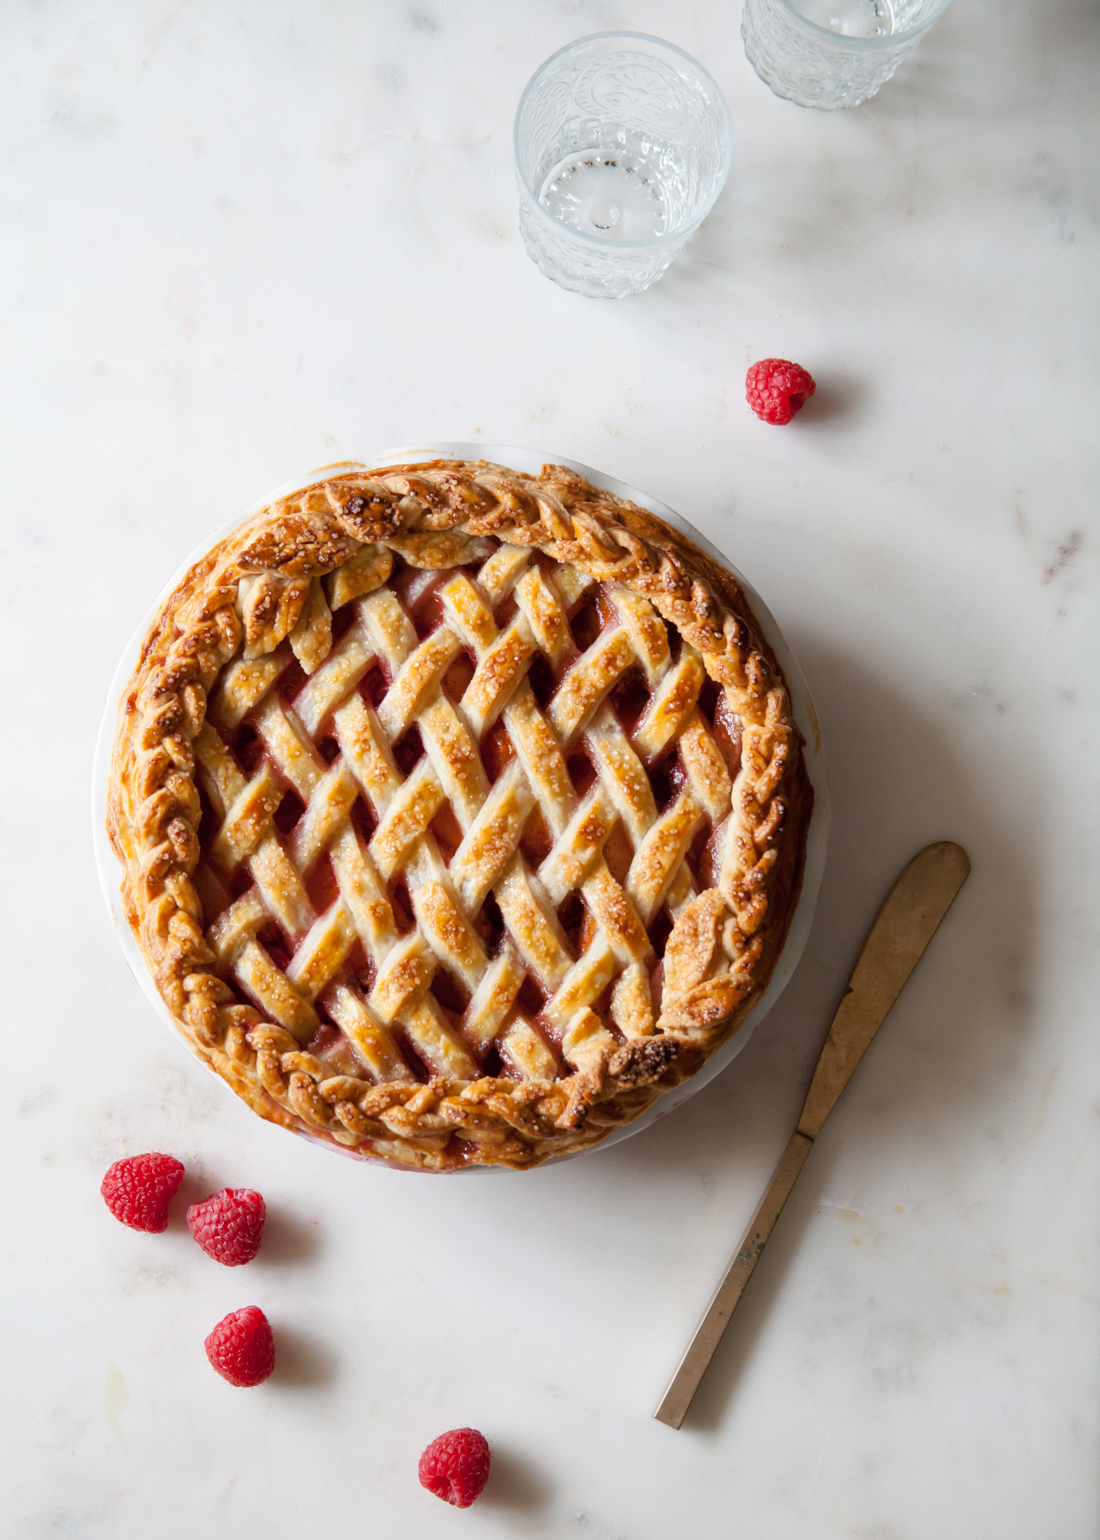 Apricot Raspberry Pie with an all butter crust and braided, lattice design.